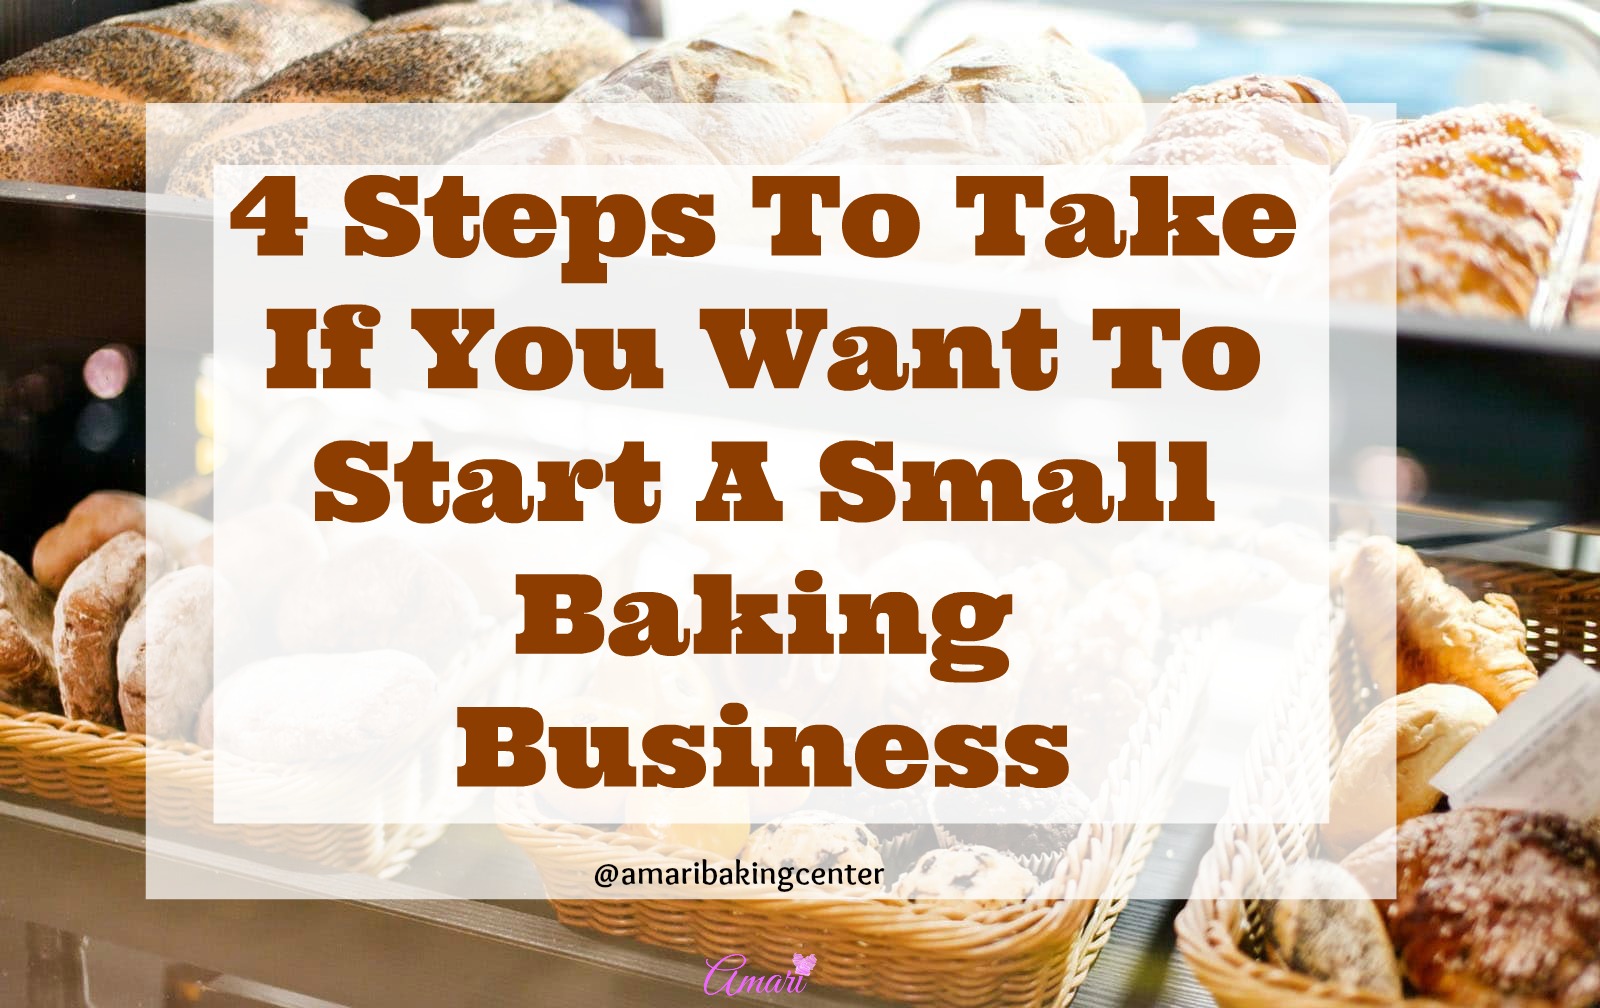 4 steps to take to start a small baking business - Blog post